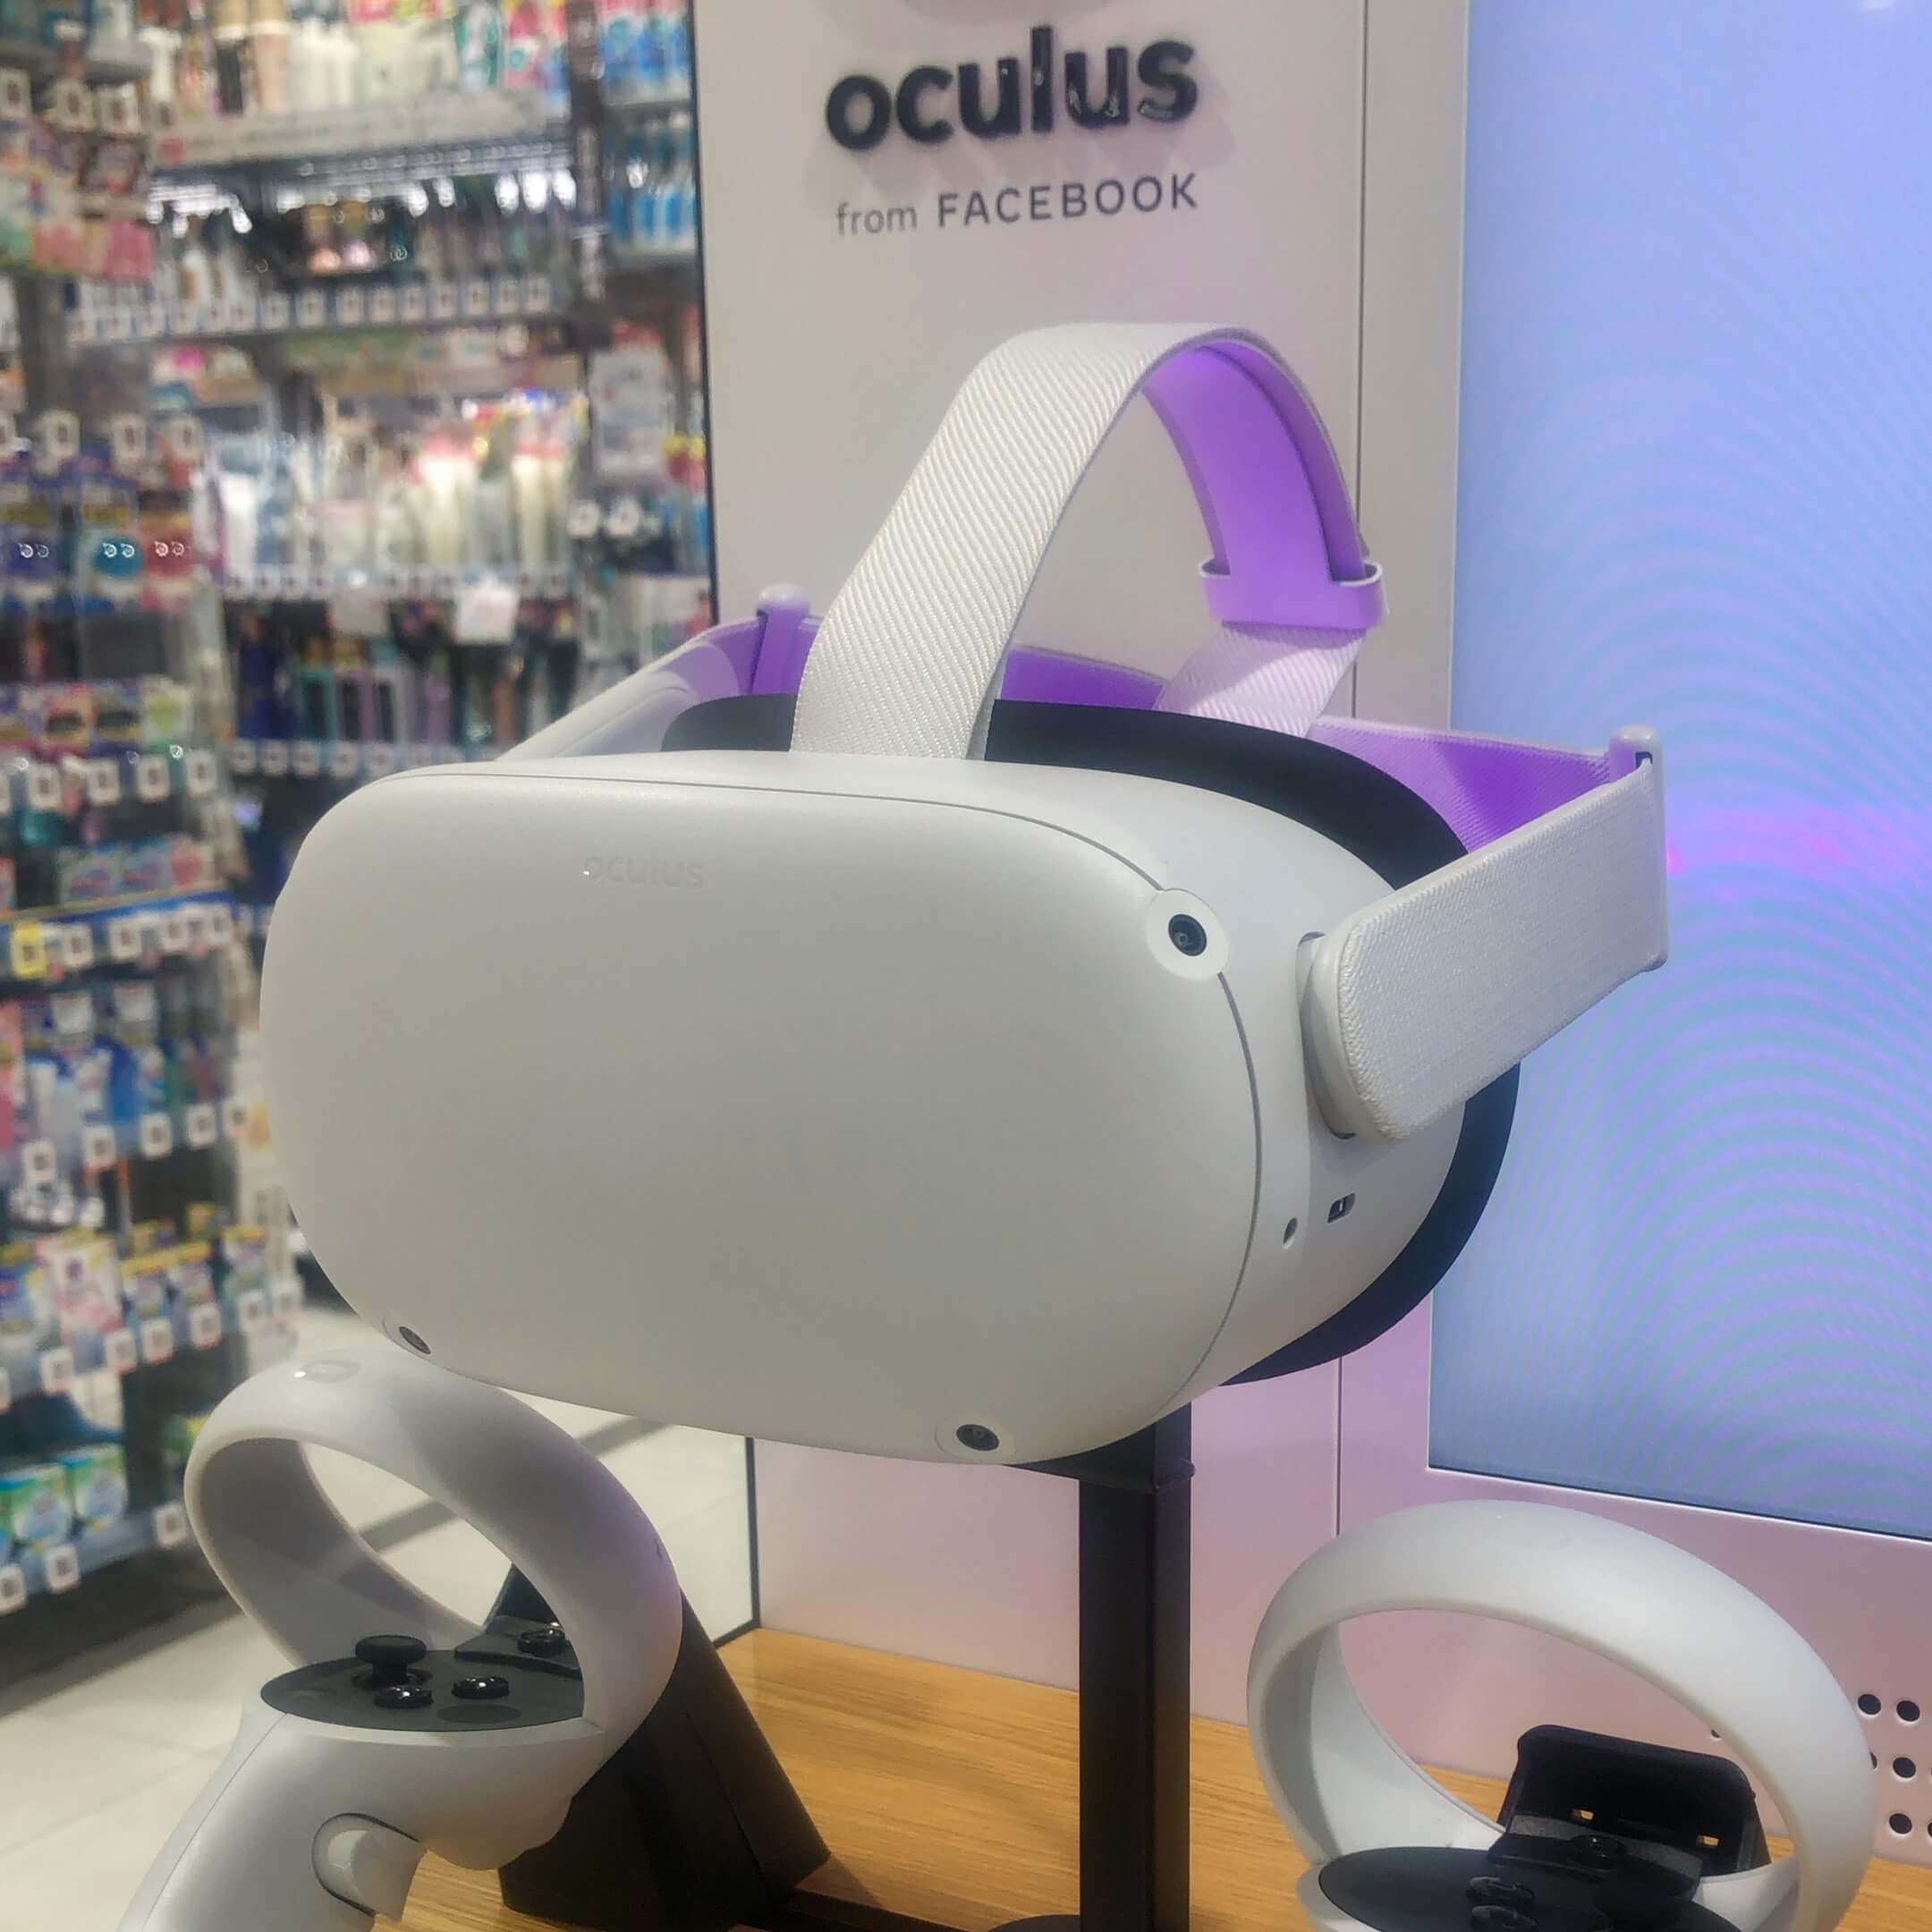 A white Oculus Quest 2 Advanced with hand controls at the bottom of the photo